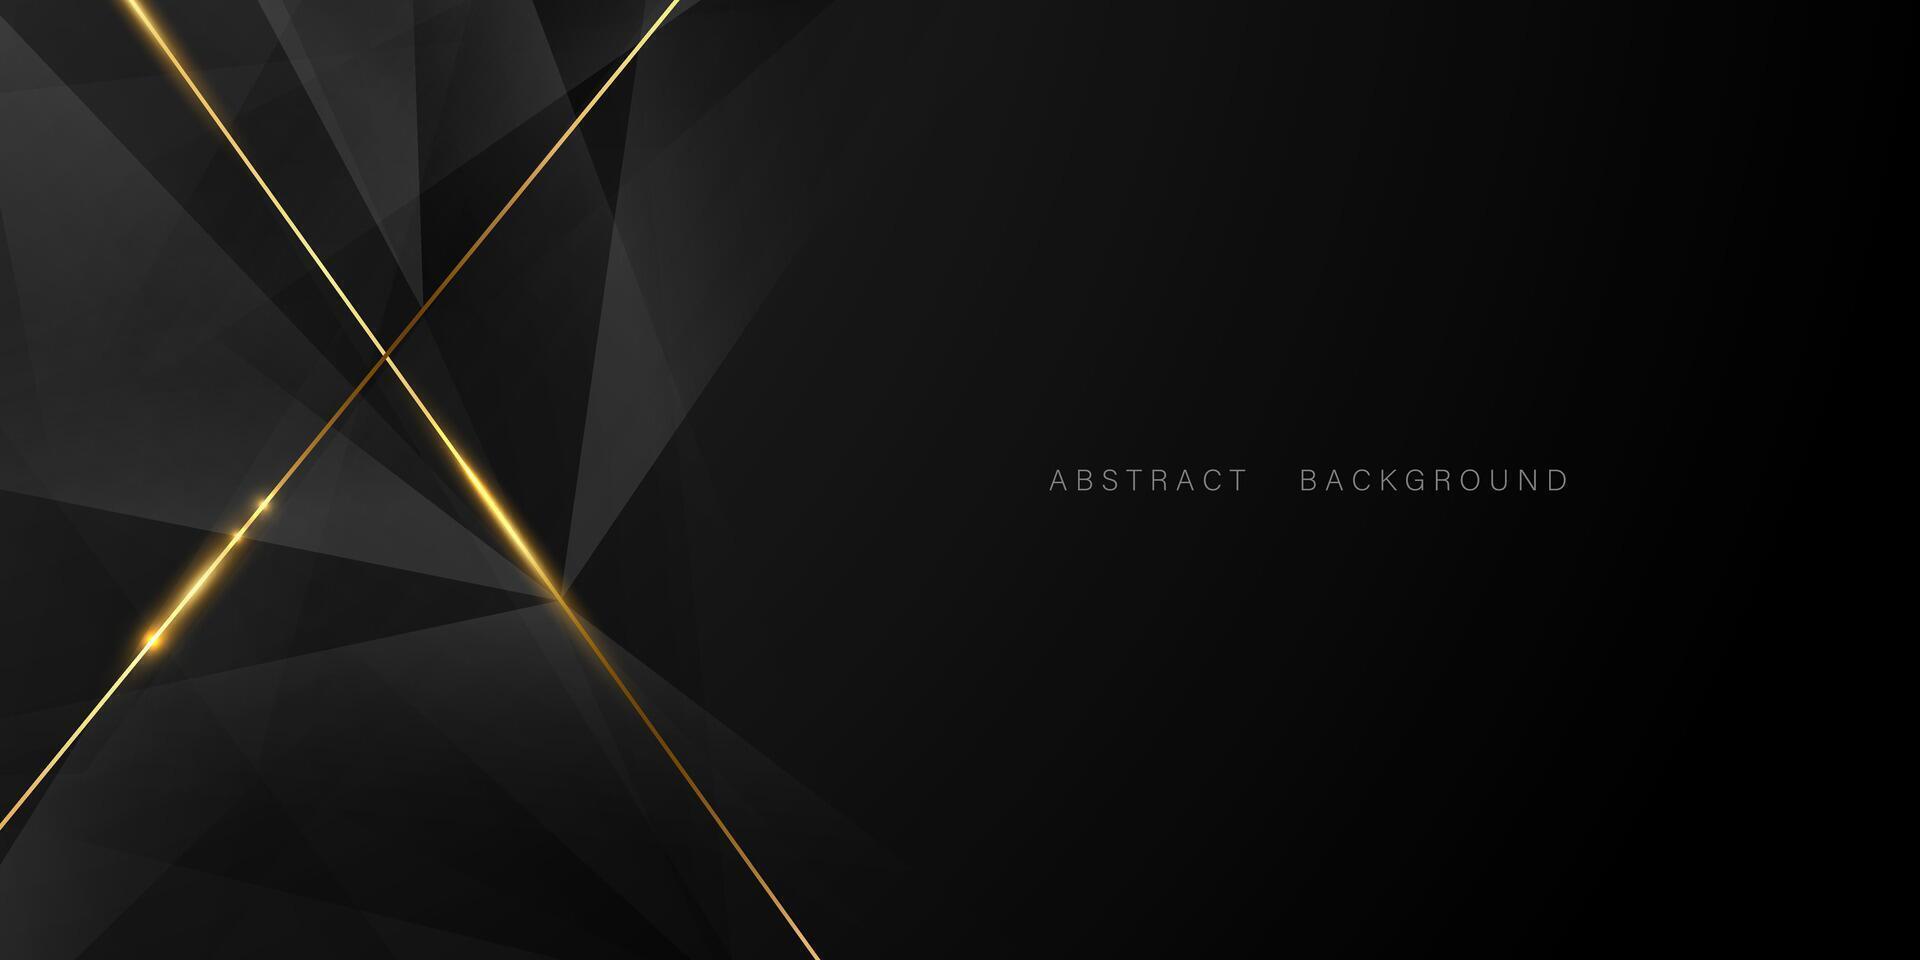 Abstract black background with elegant vector illustration.